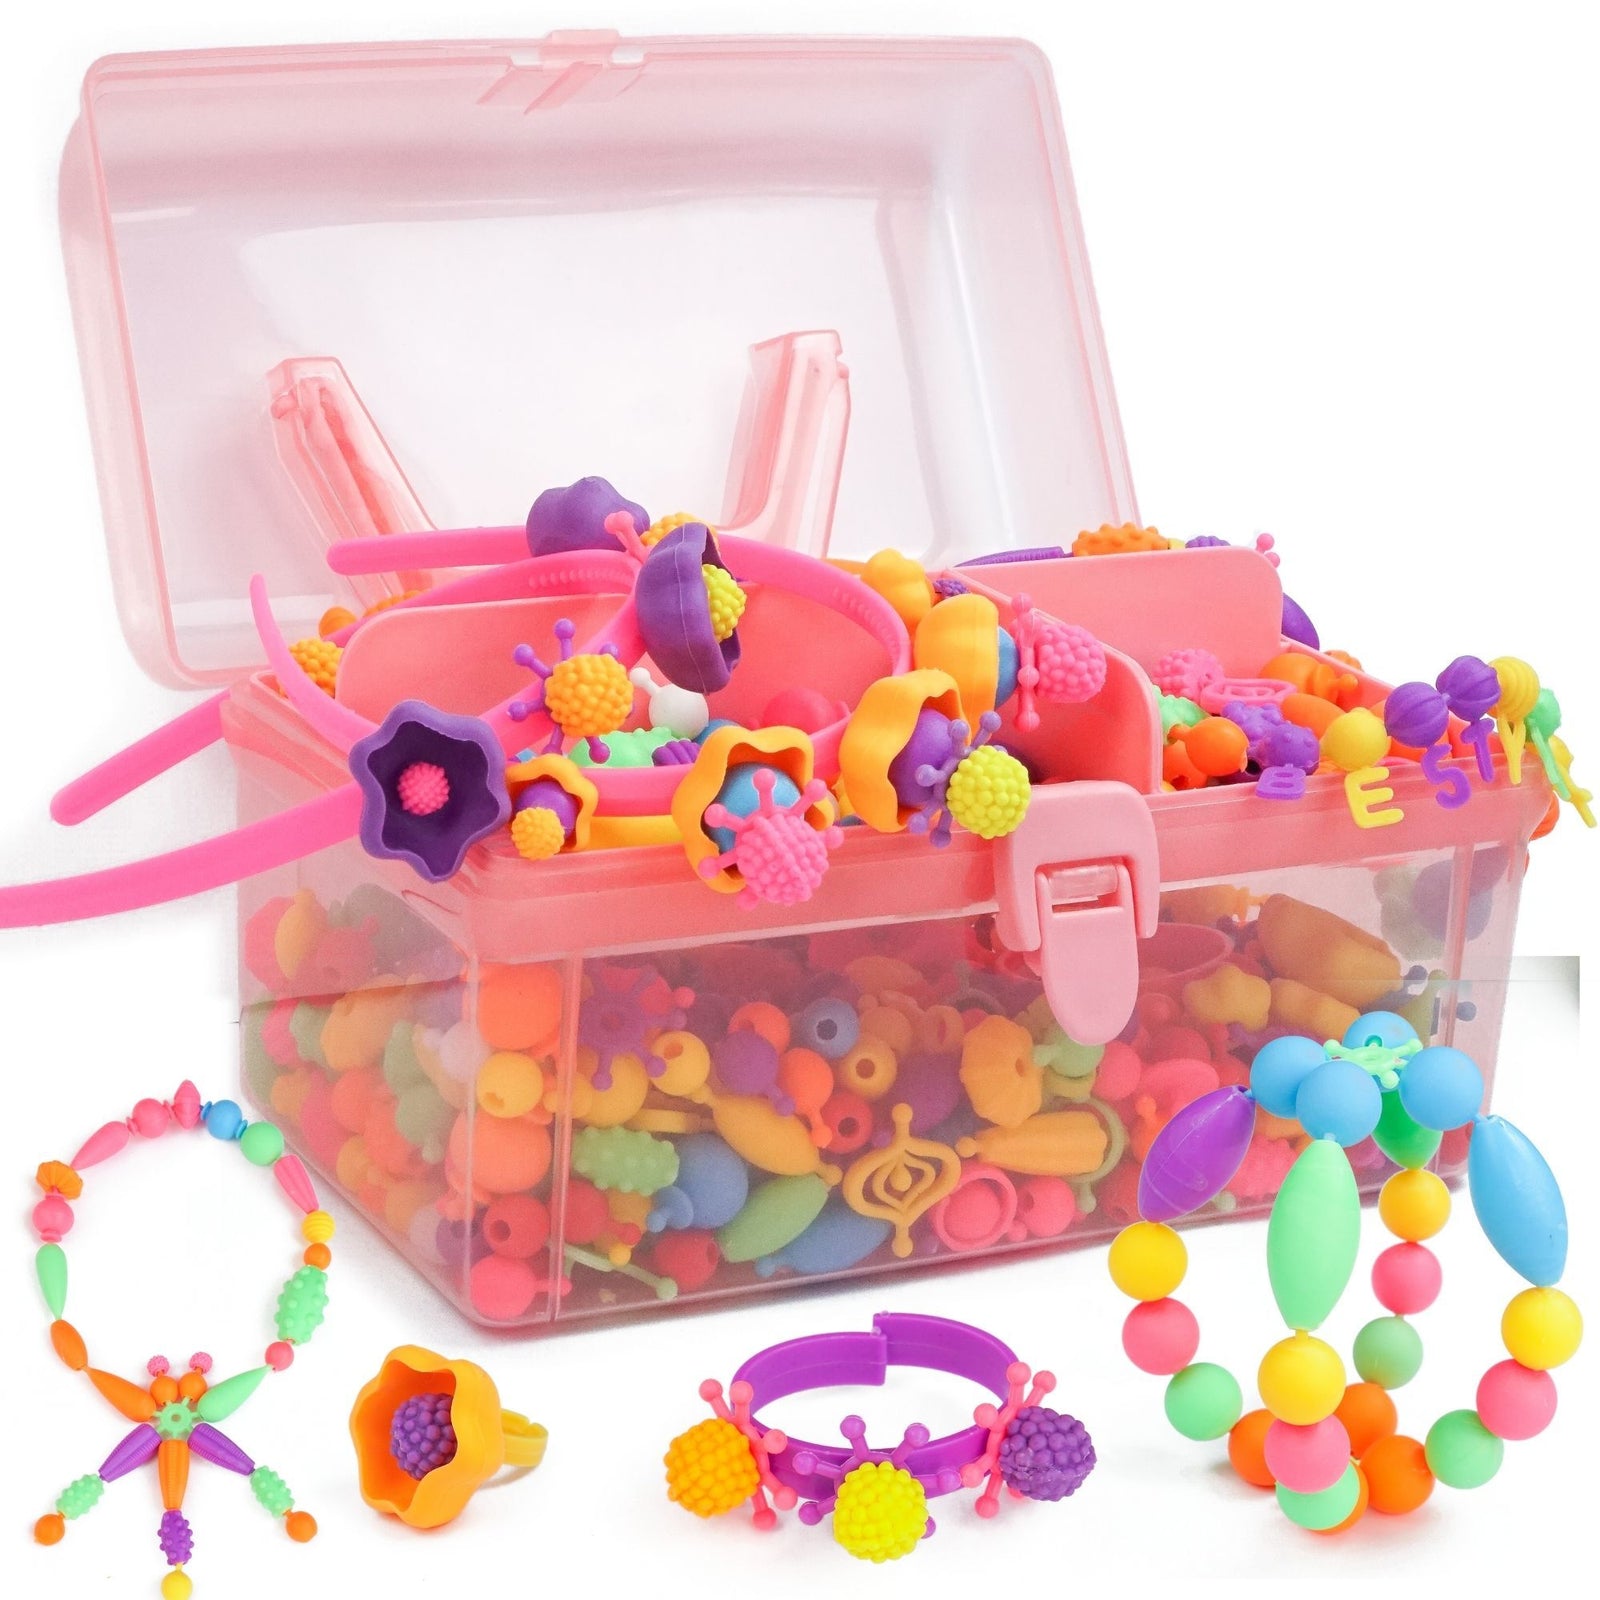 Axel Adventures Pop Beads for Toddlers Kids Jewelry Kuwait